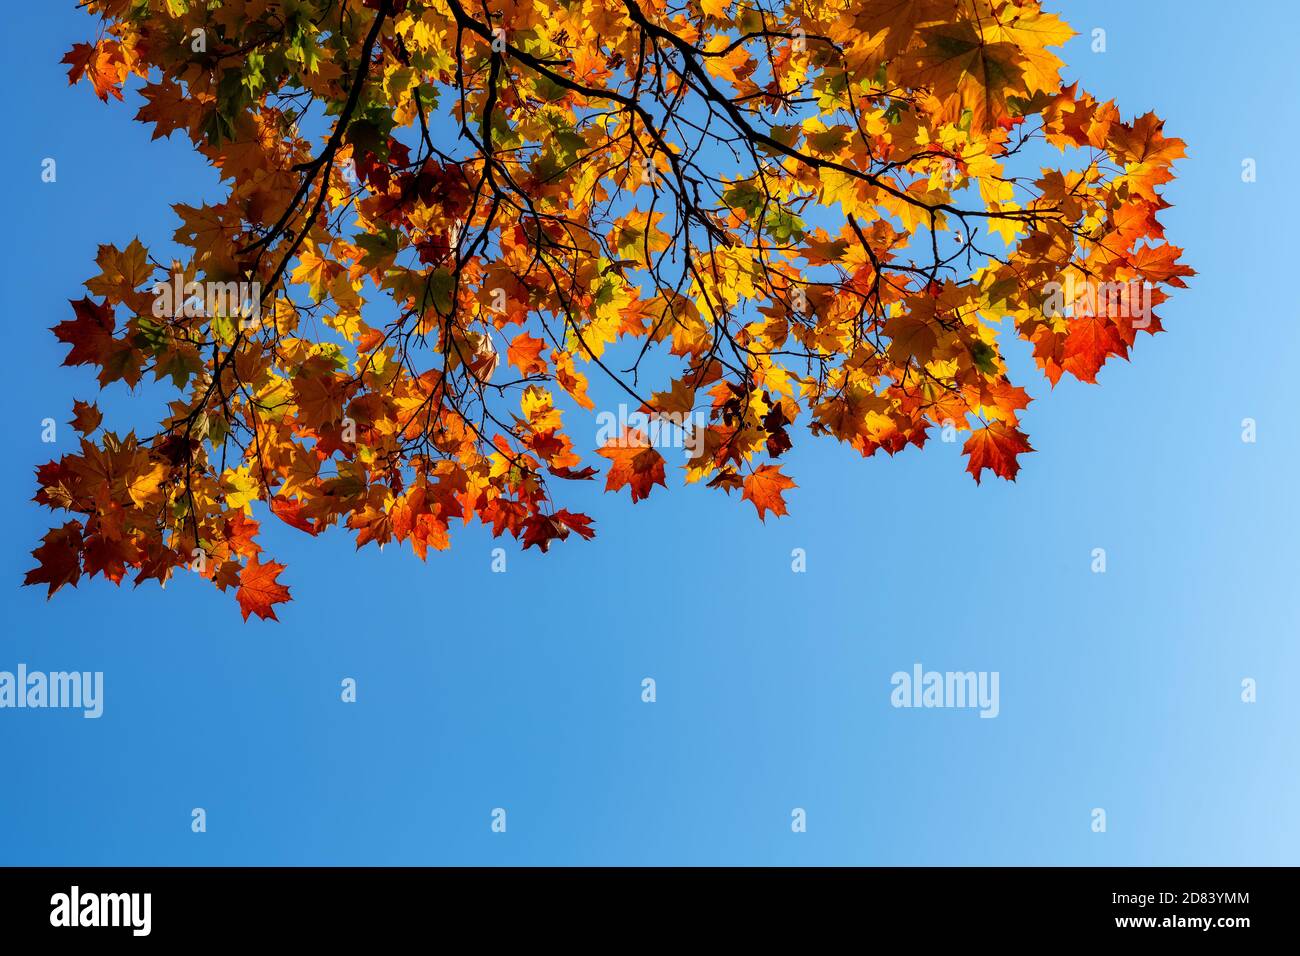 Autumn maple branch with colorful leaves on blue sky Stock Photo